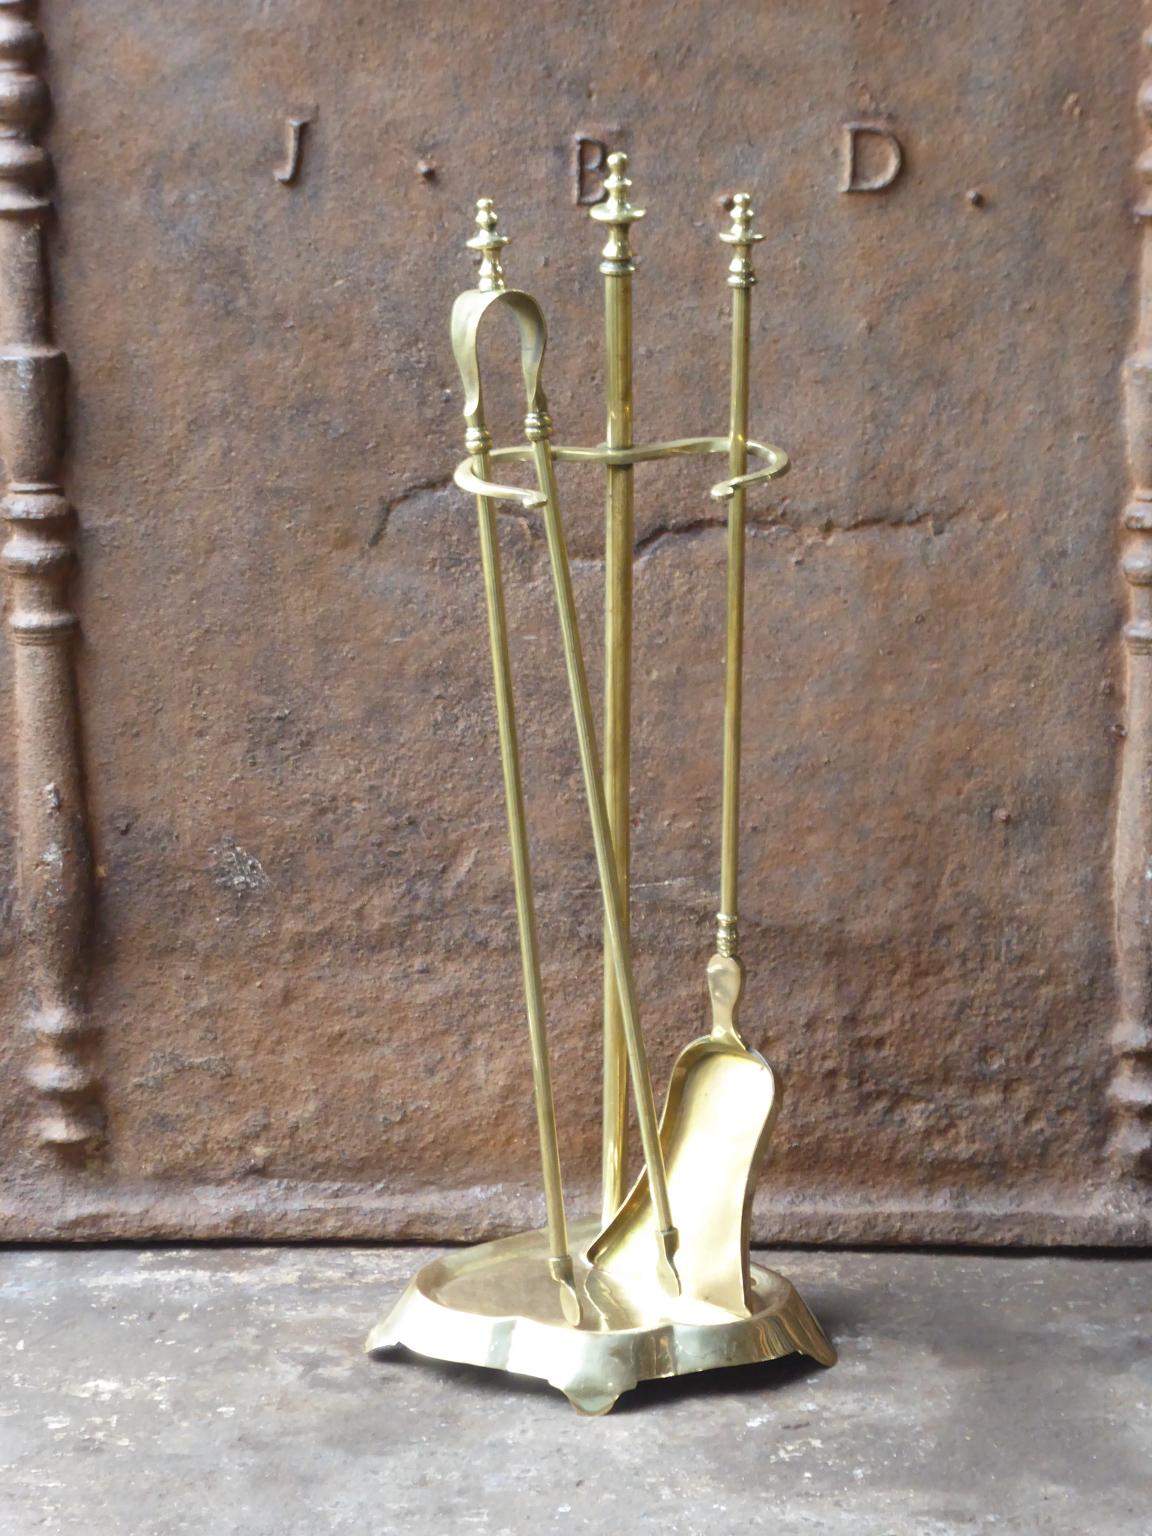 19th century French Napoleon III fireplace tool set. The toolset consists of a stand and two fire irons all made of polished brass. It is in a good condition and is fully functional.
 
 





 